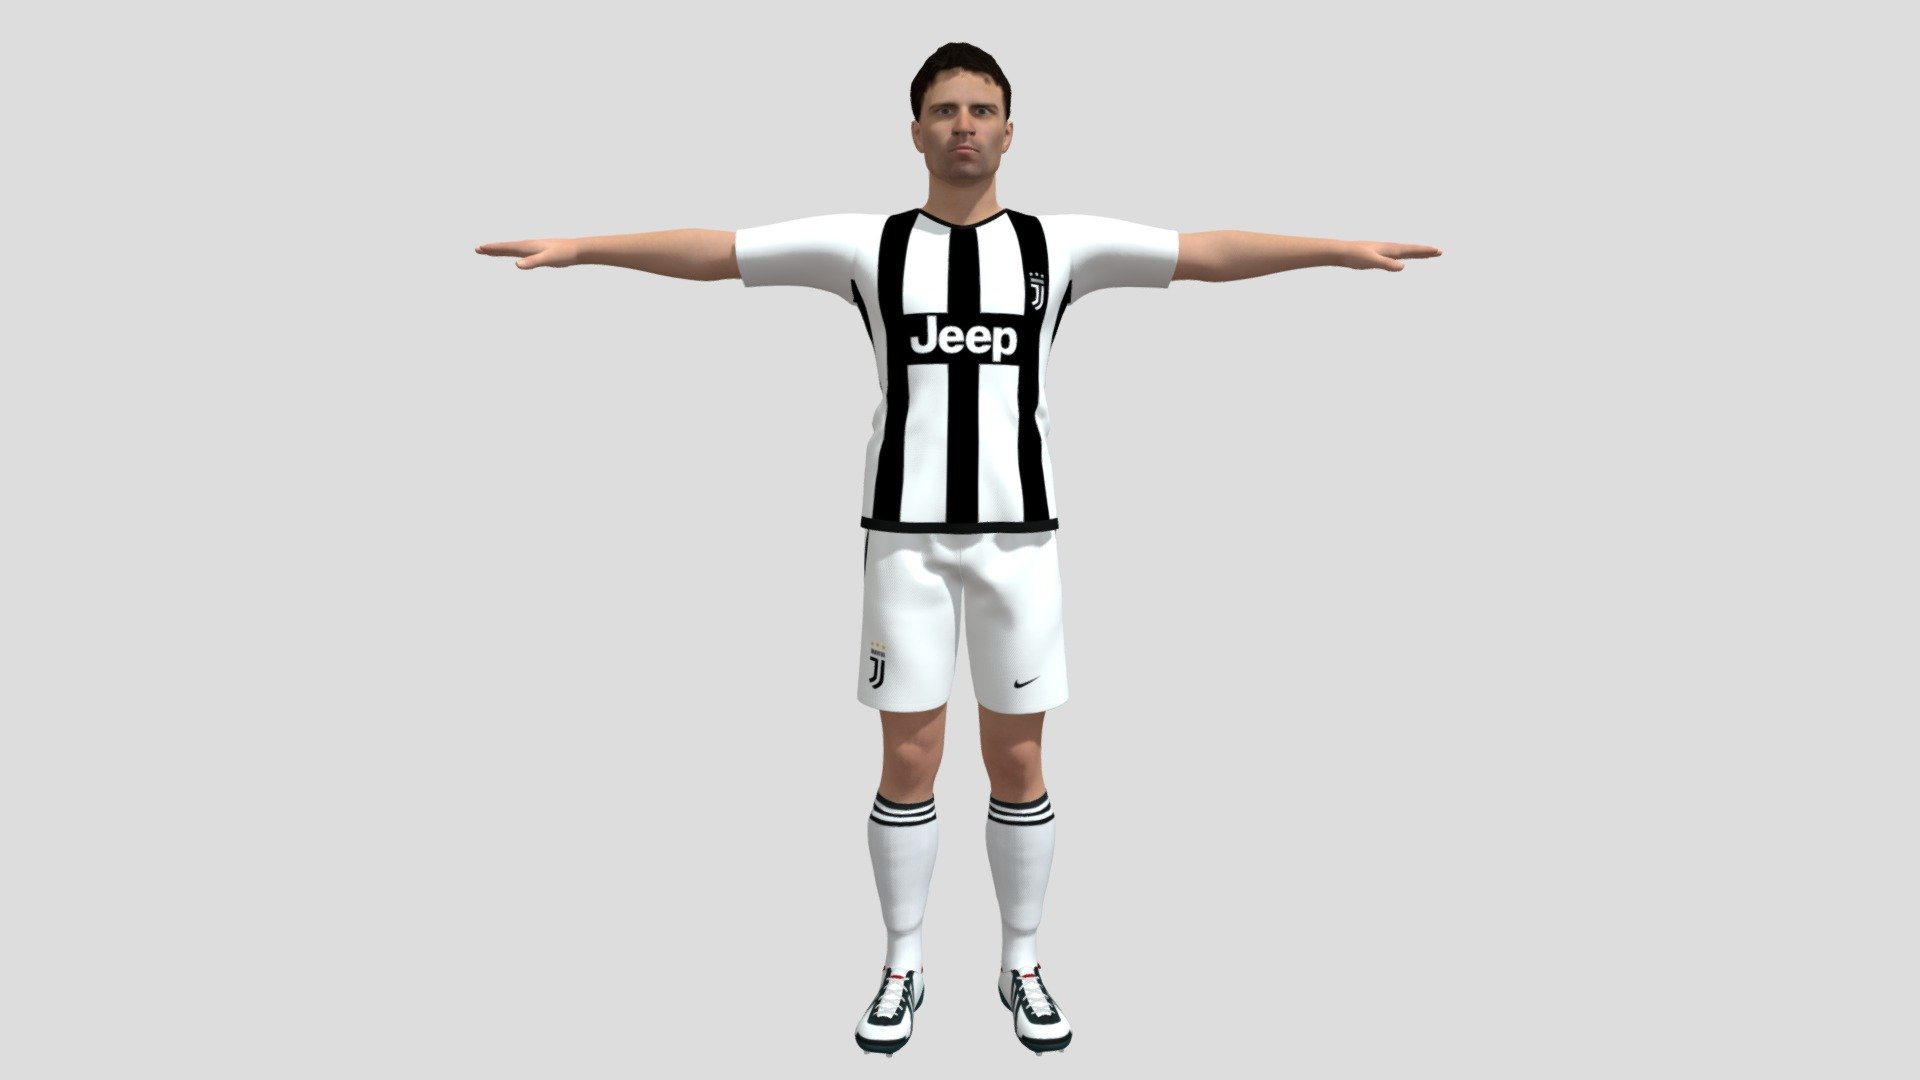 Soccer Player 3D model is a high quality, photo real model that will enhance detail and realism to any of your game projects or commercials. The model has a fully textured, detailed design that allows for close-up renders 3d model